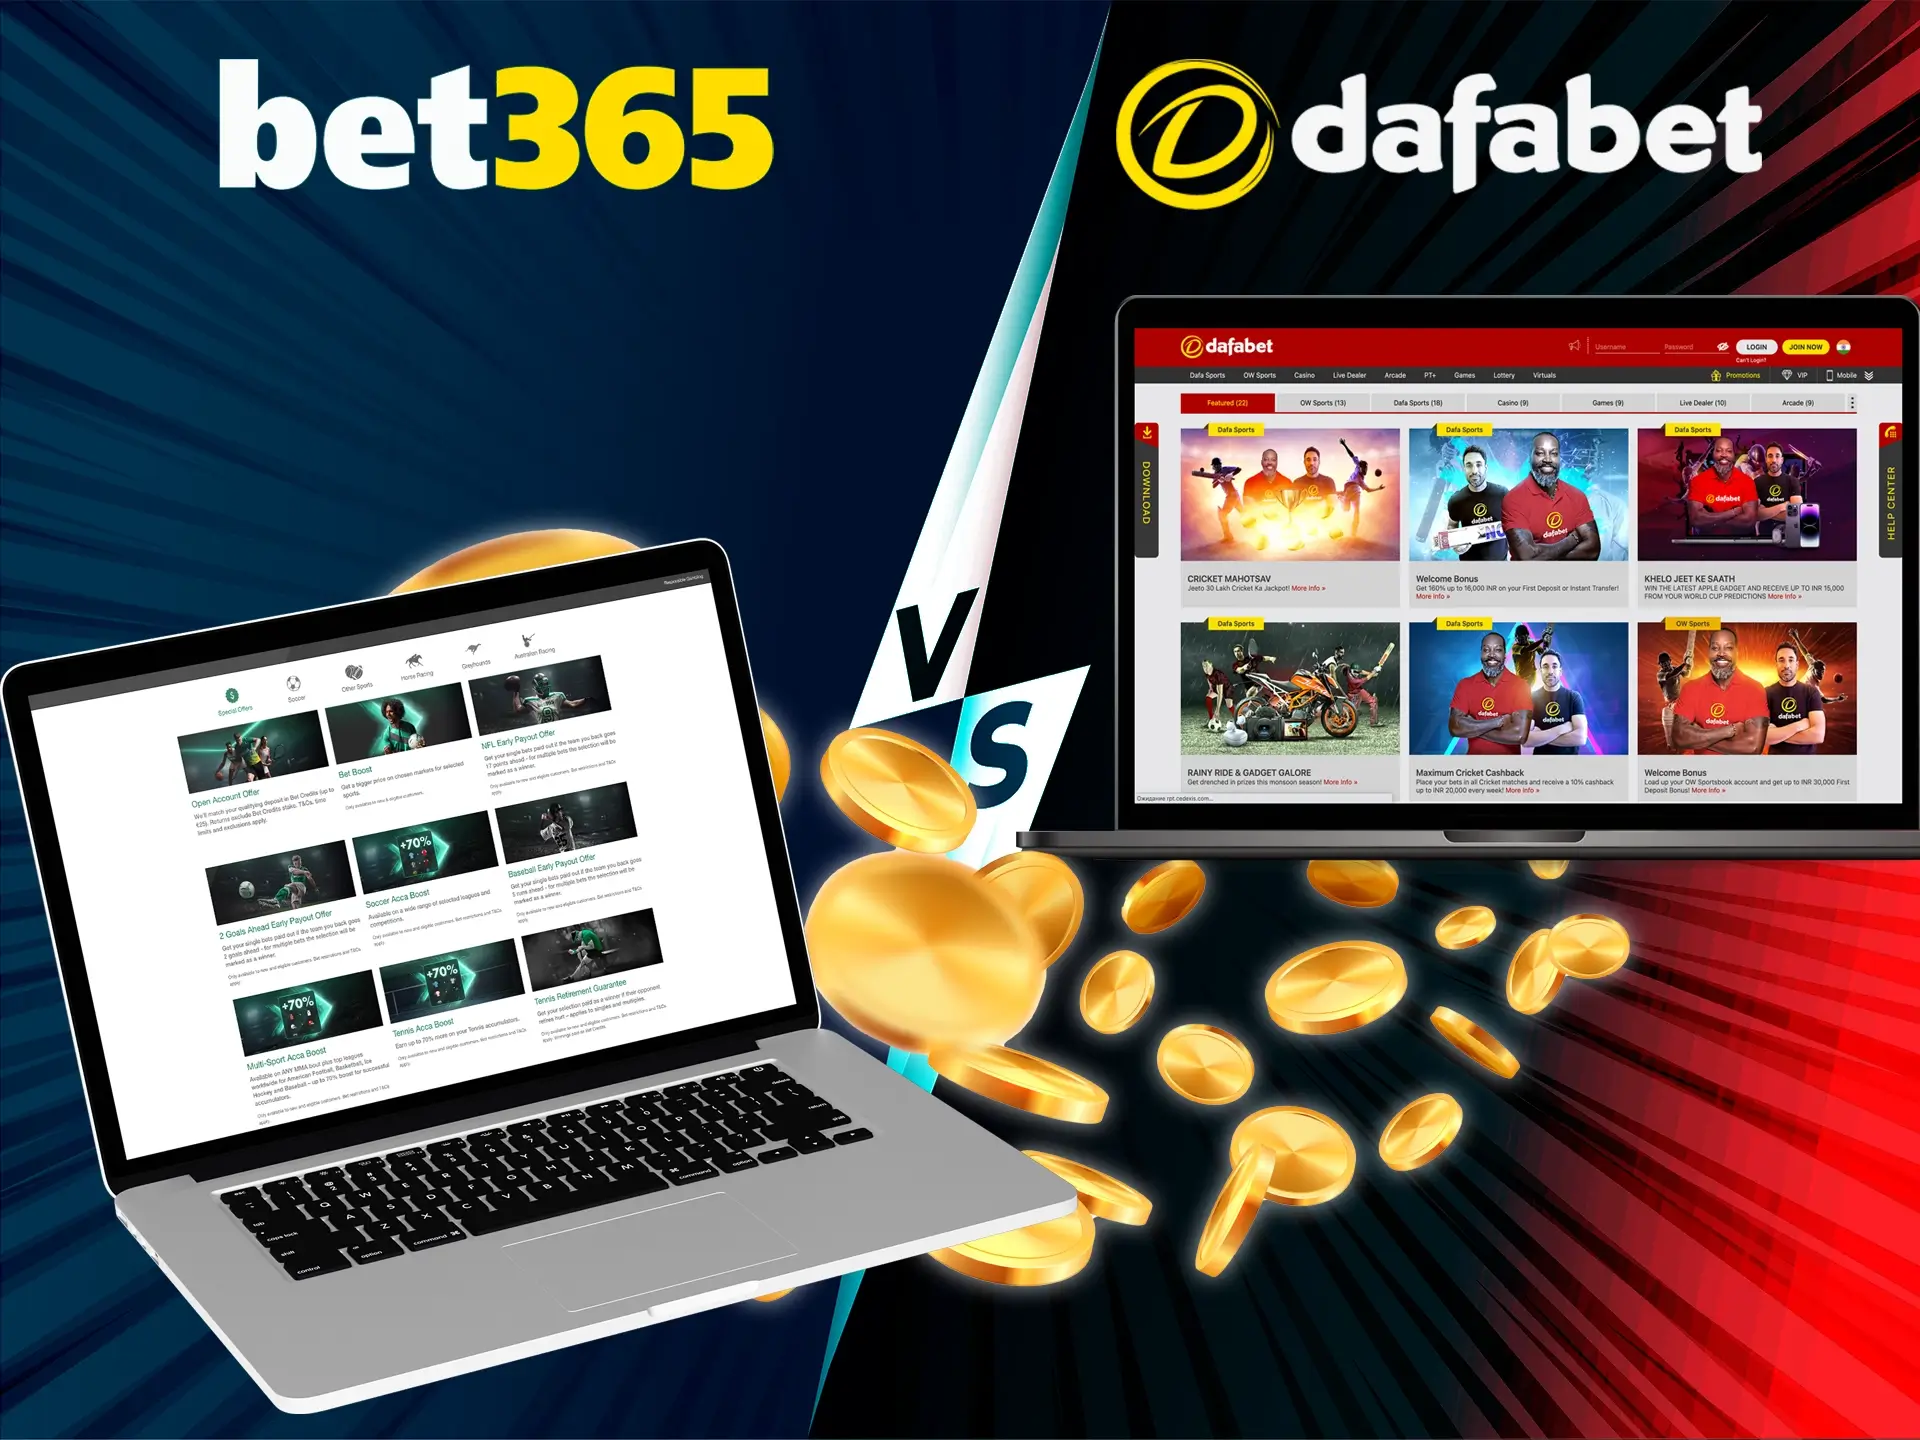 Plenty of bonuses available at Dafabet and Bet365, go for the prizes.